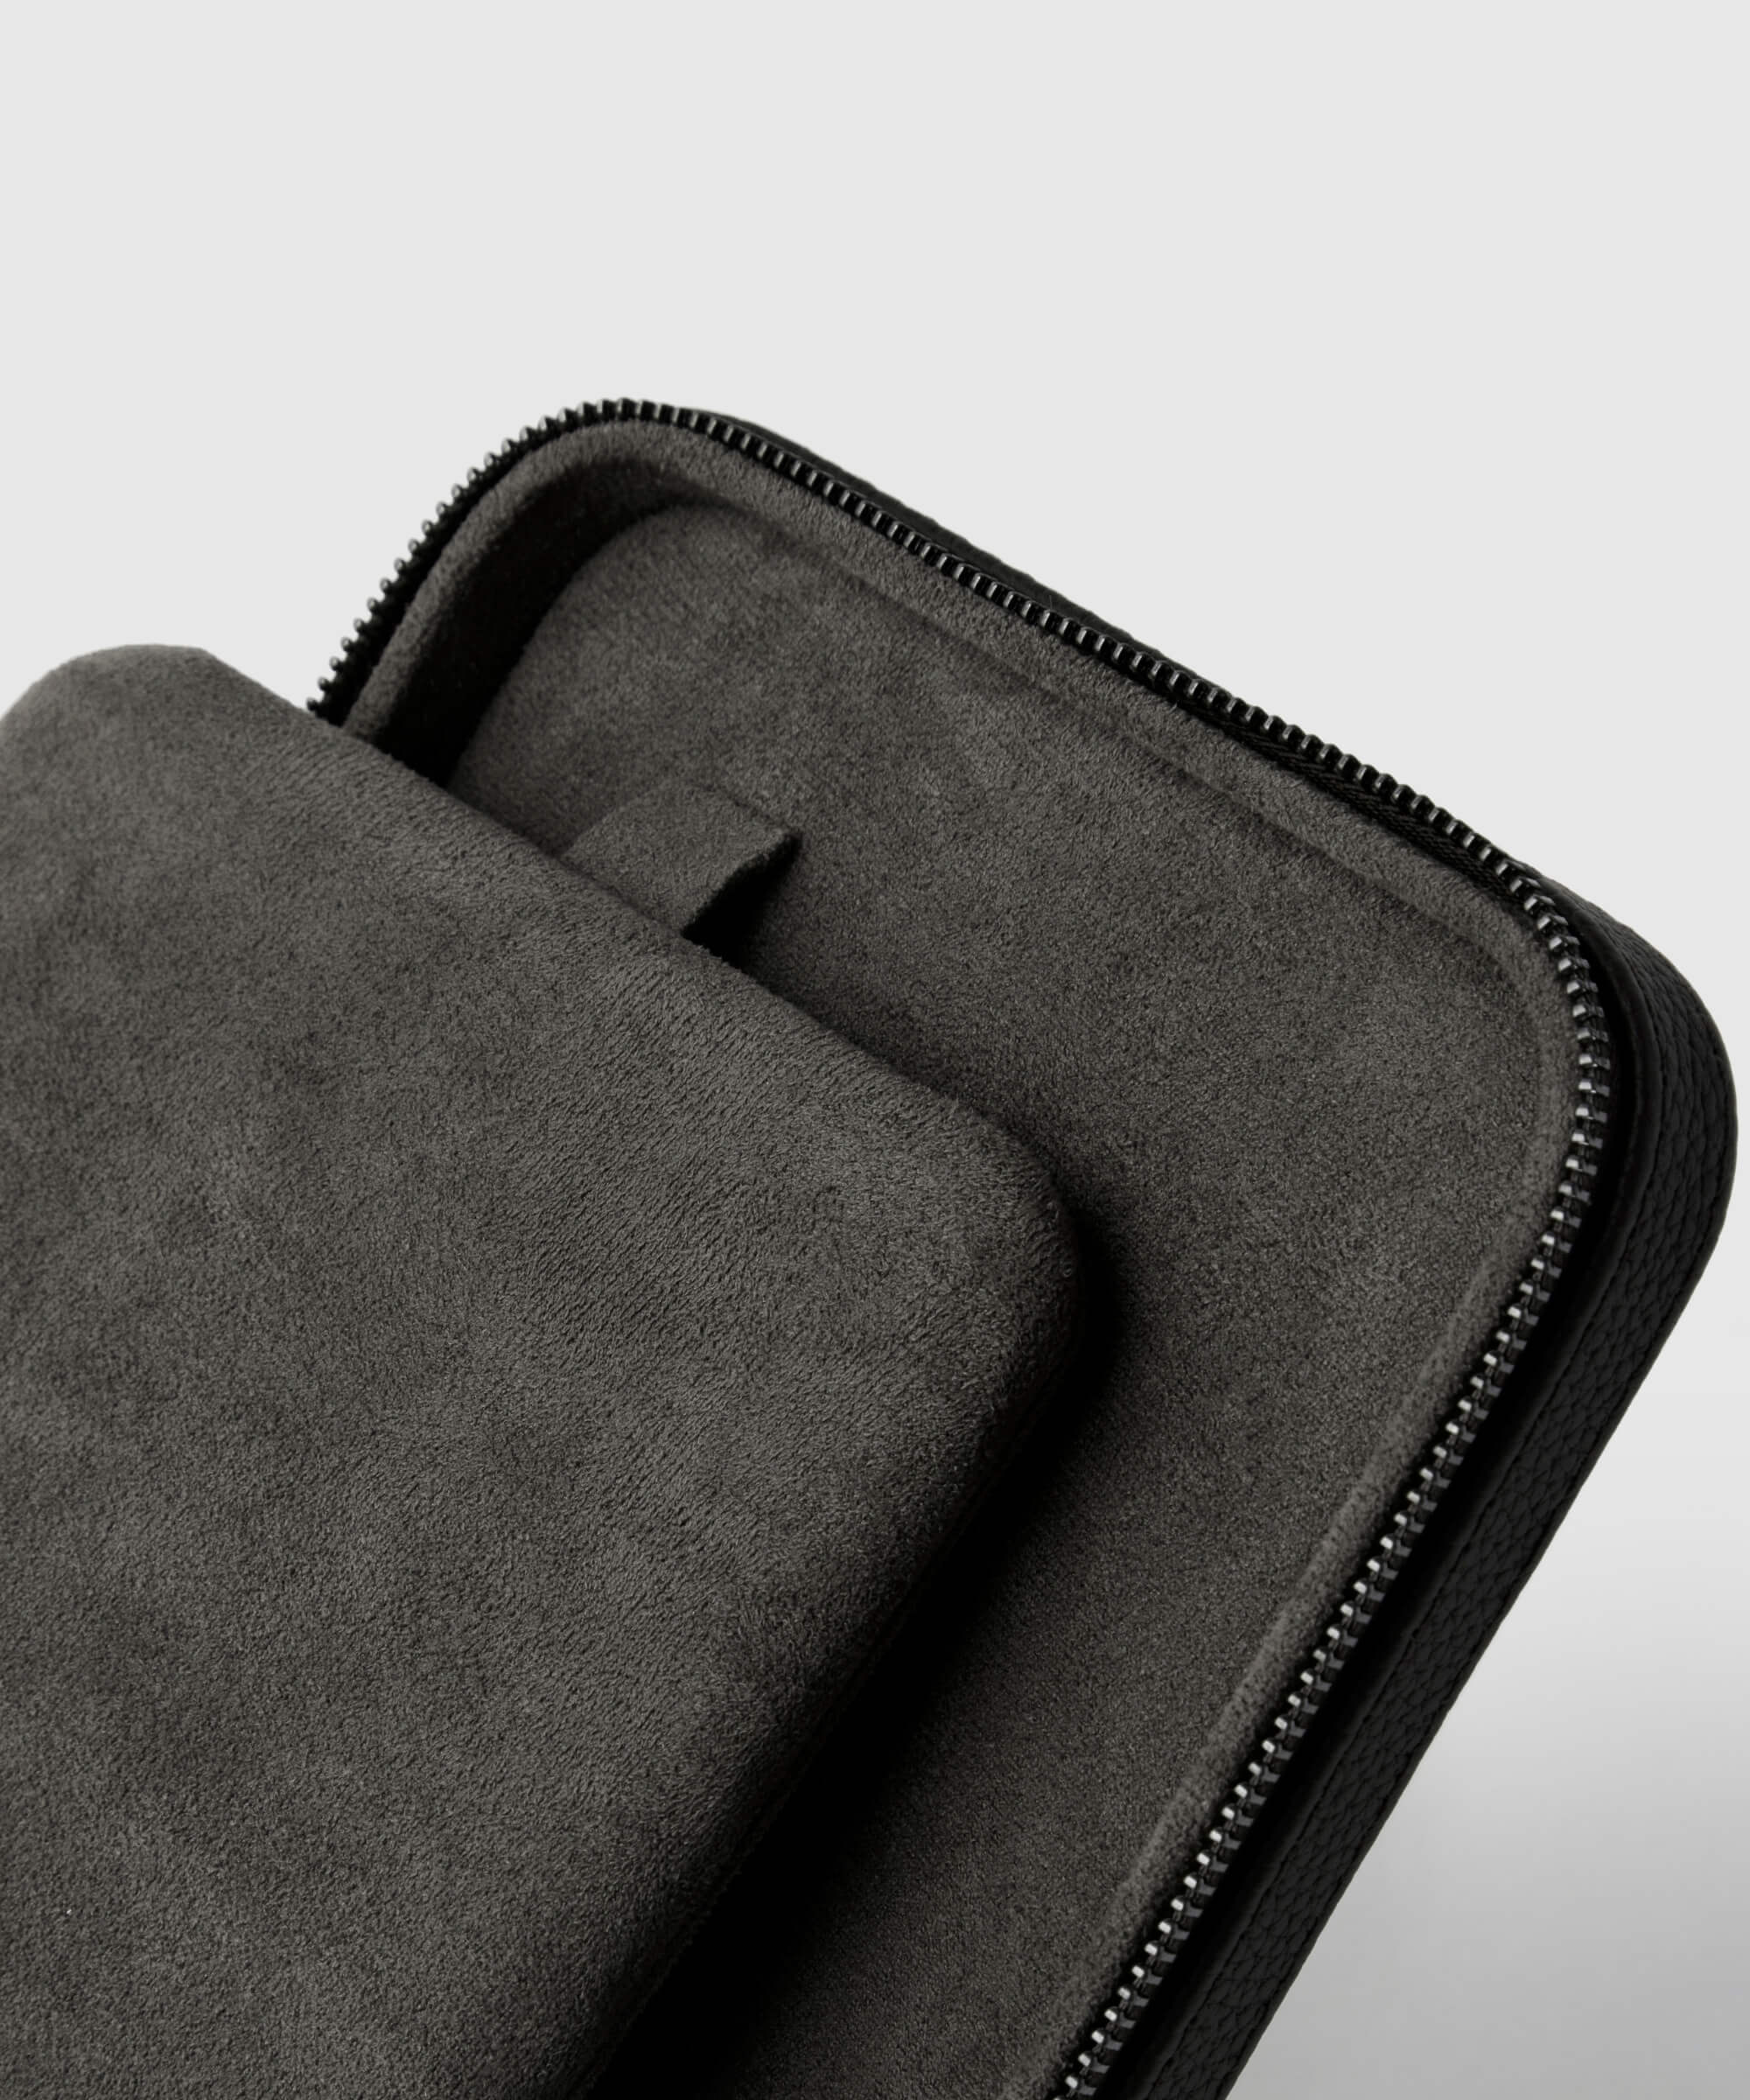 Close-up of a black luxury leather Fraser 6 Watch Travel Case - Black (Coming Soon), partially open to reveal an inner compartment and a fabric tab. The material appears soft and textured, exuding the quality synonymous with the TAWBURY range.